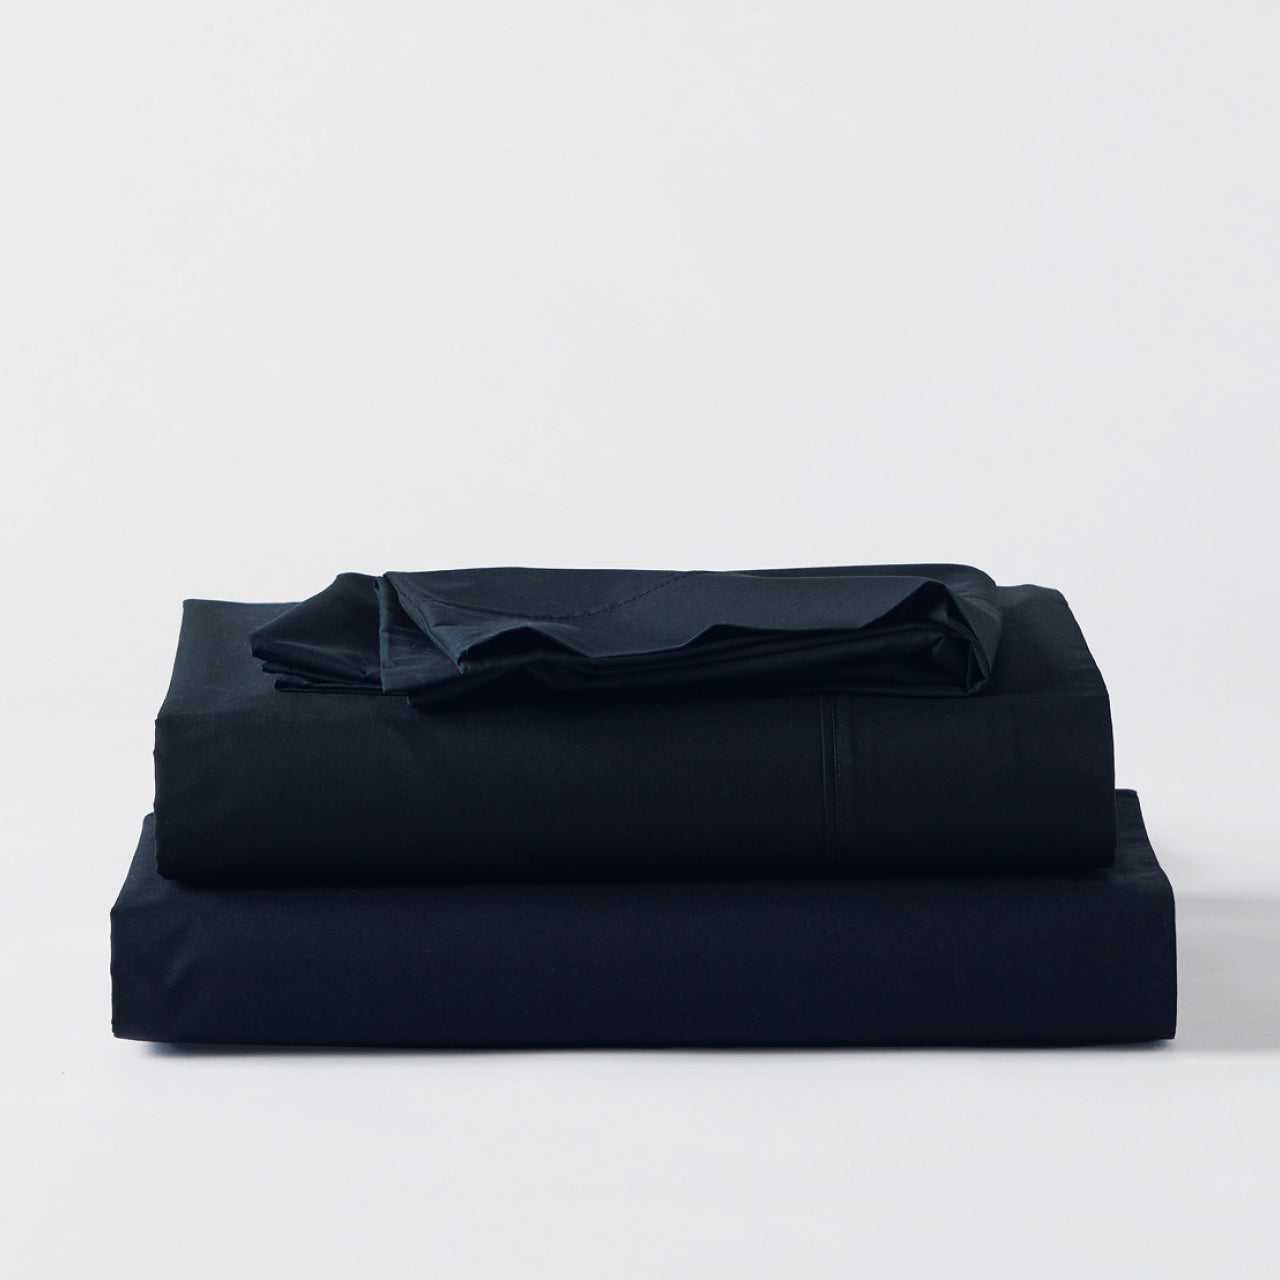 Premium Percale Black Sheets folded up on floor